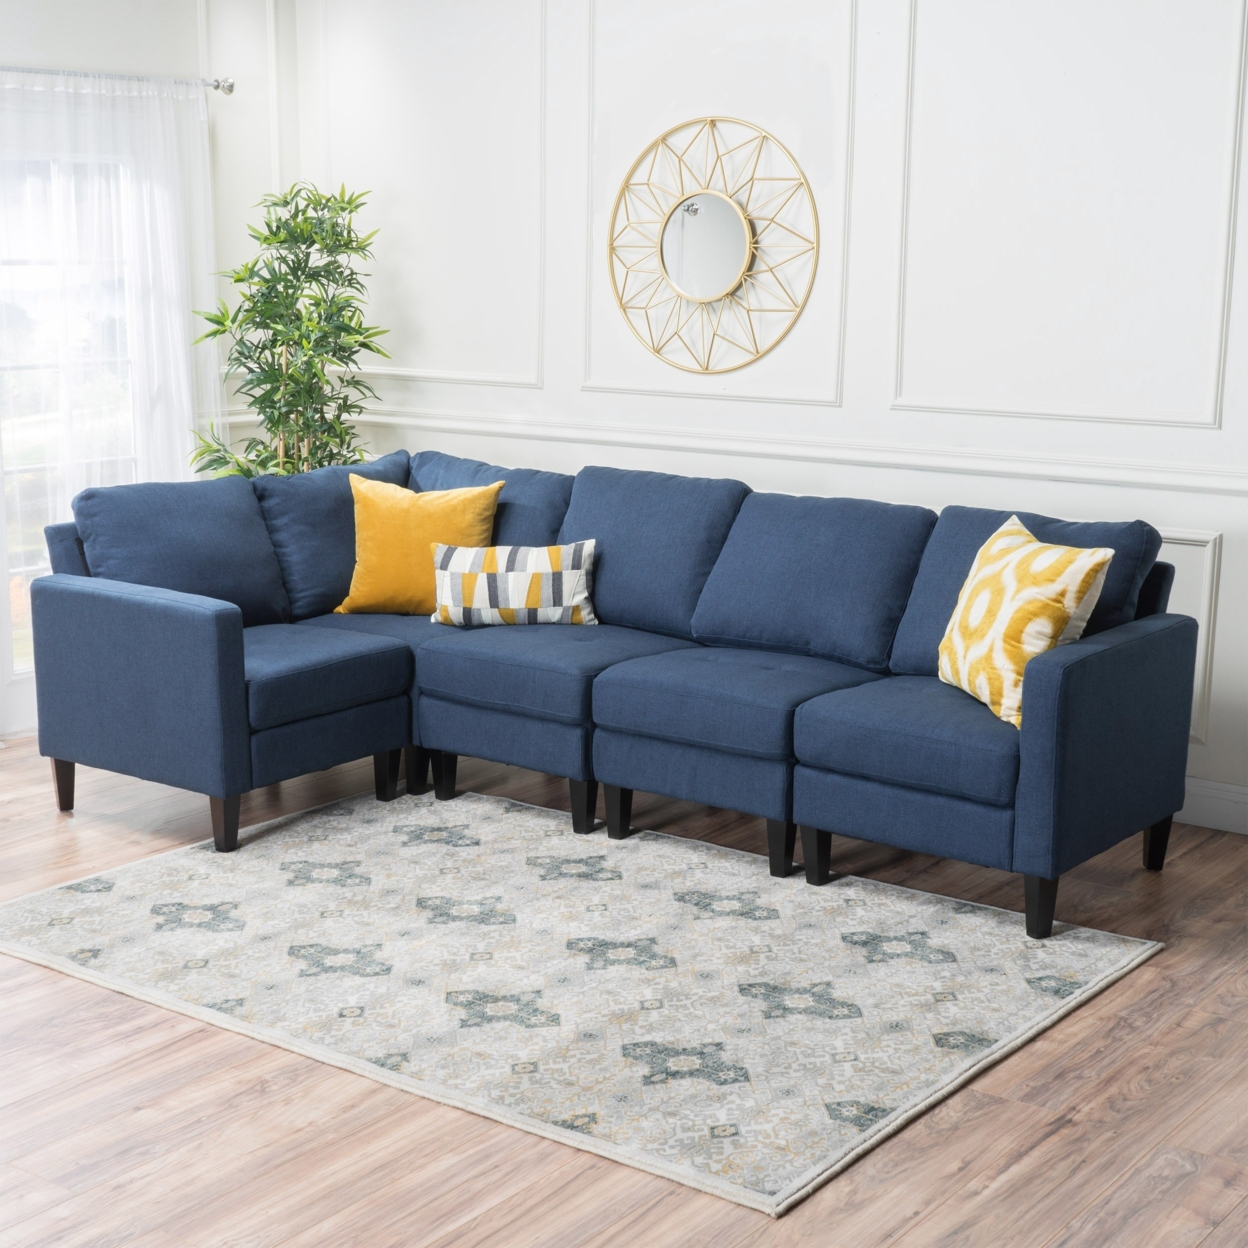 Carolina Fabric Sectional Couch - Light Gray